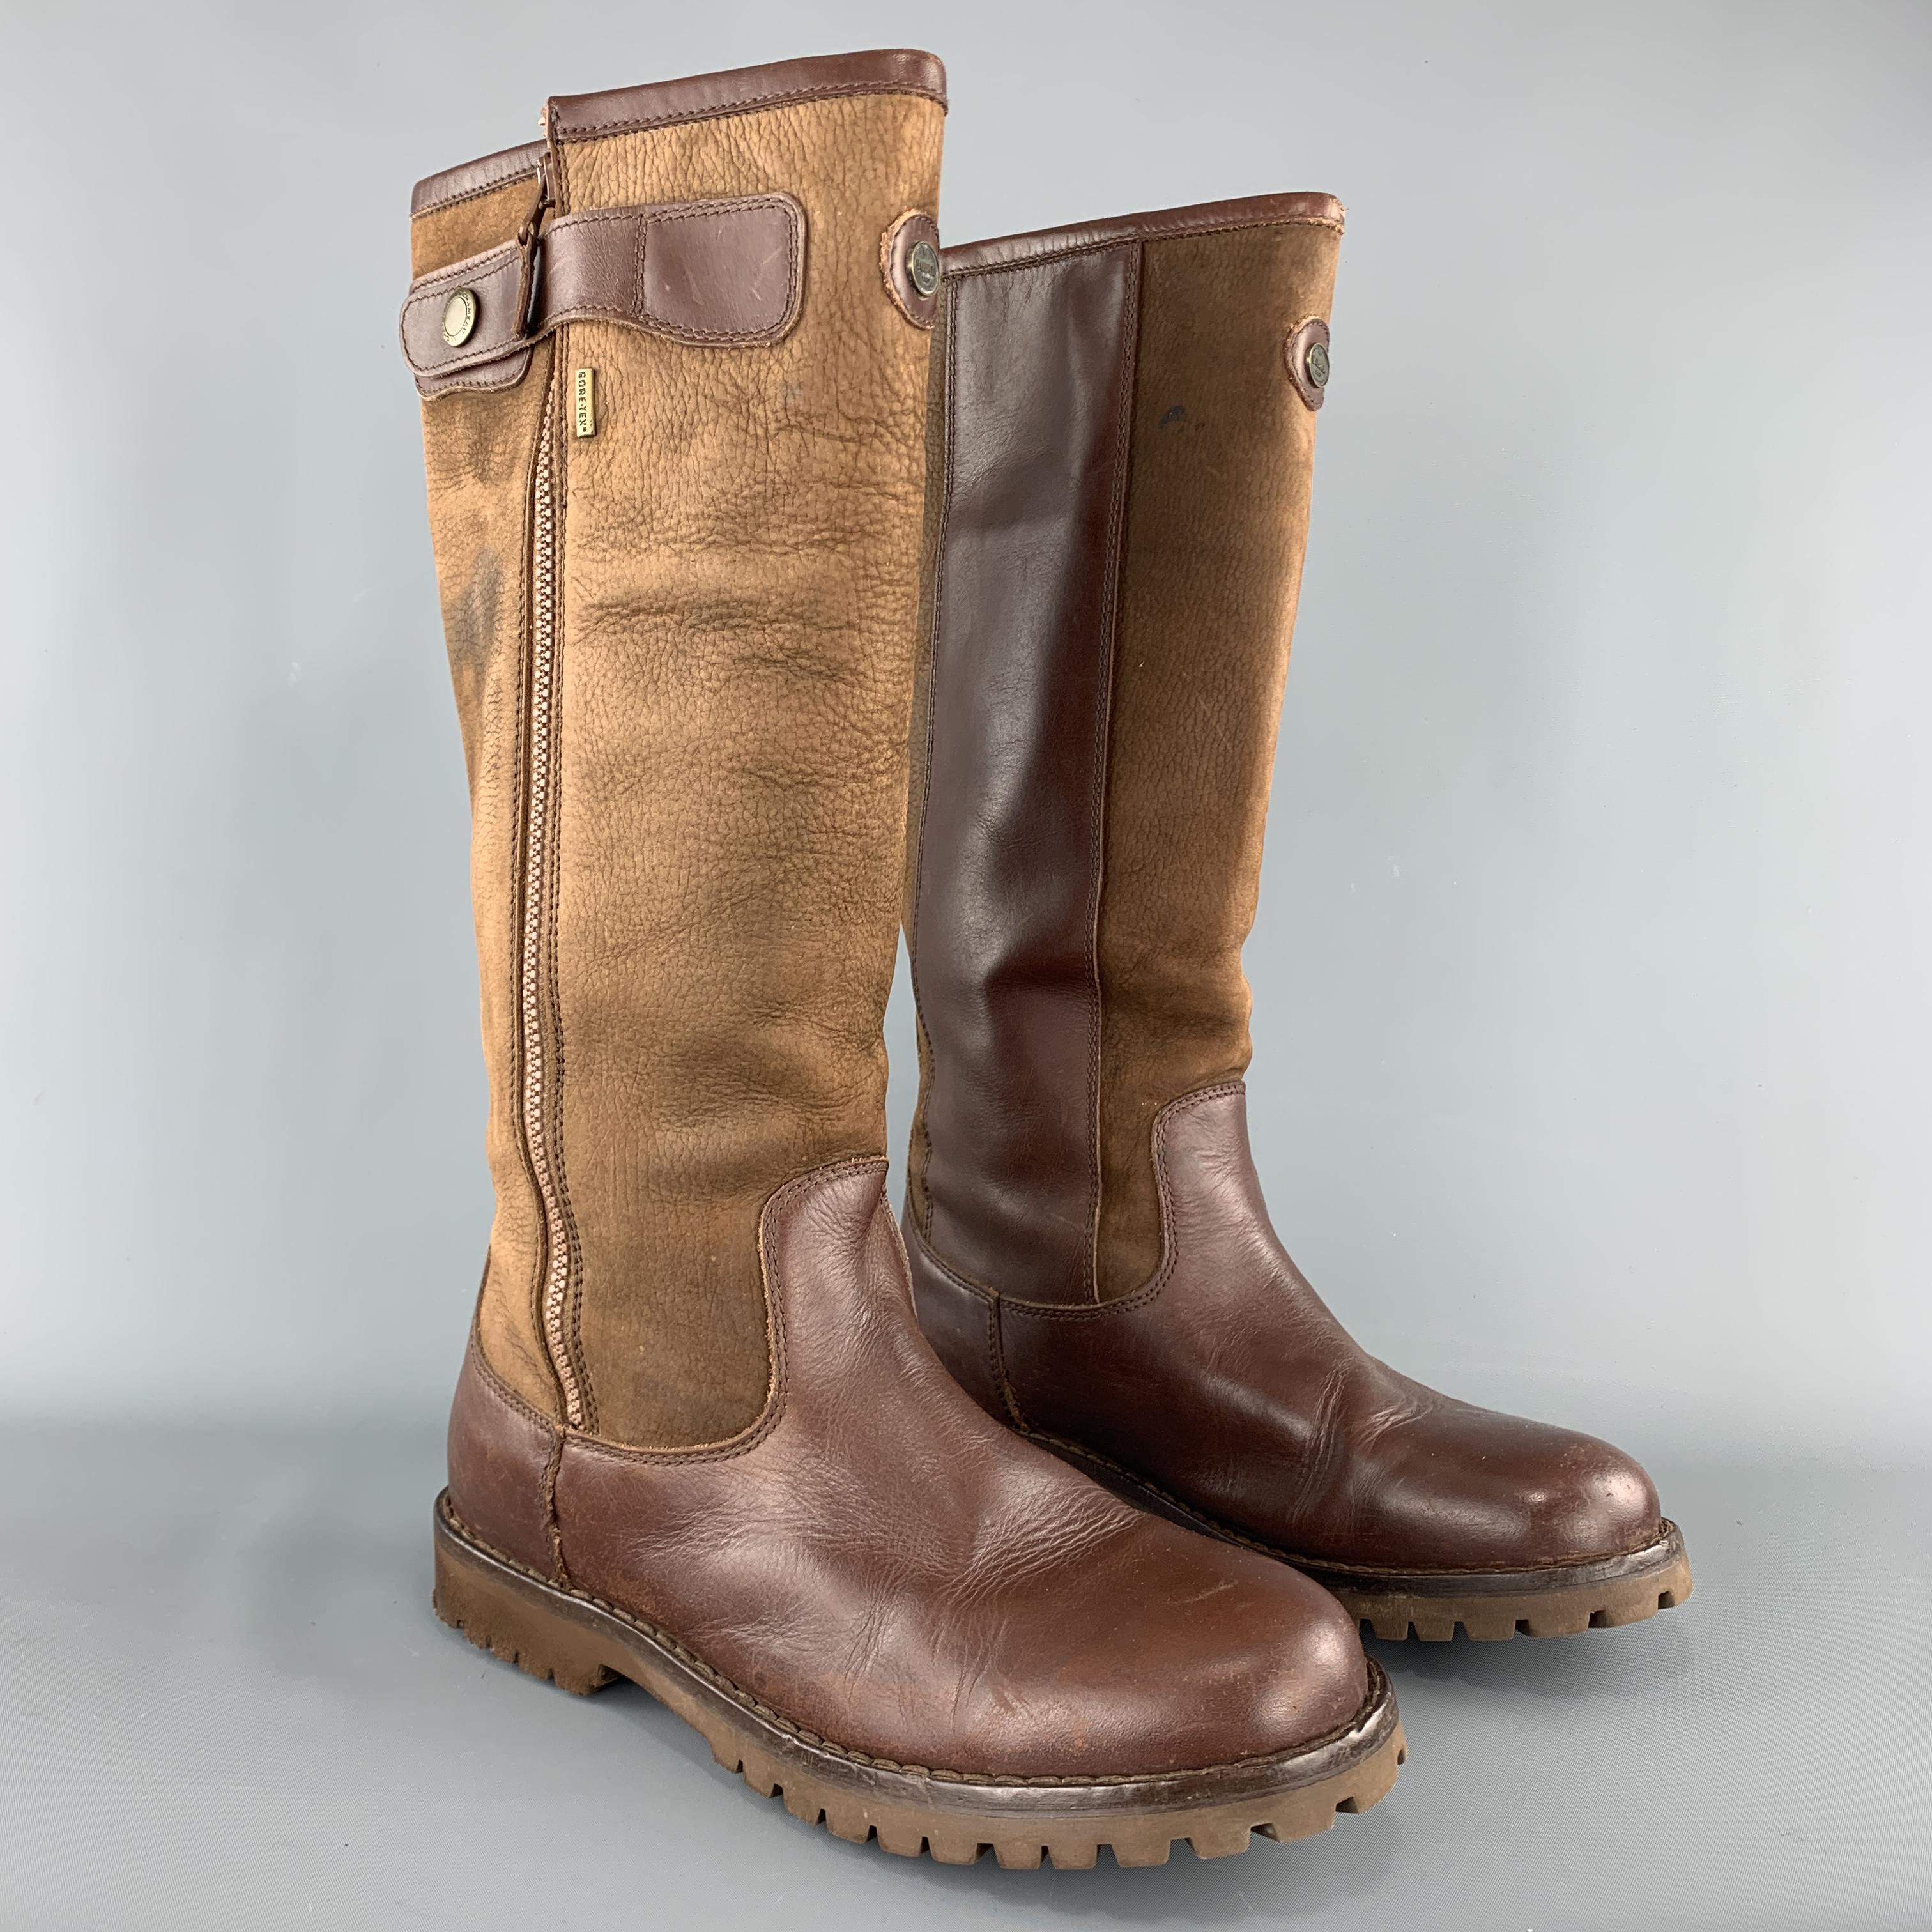 LE CHAMEAU work boots come in brown leather with tan textured leather shaft, wide zips, and rubber soles. Includes storage bag. Wear throughout. As-is. Made in Portugal.

Fair Pre-Owned Condition.
Marked: US 9.5

Outsole: 11.75 x 4.25 in.
Length: 16